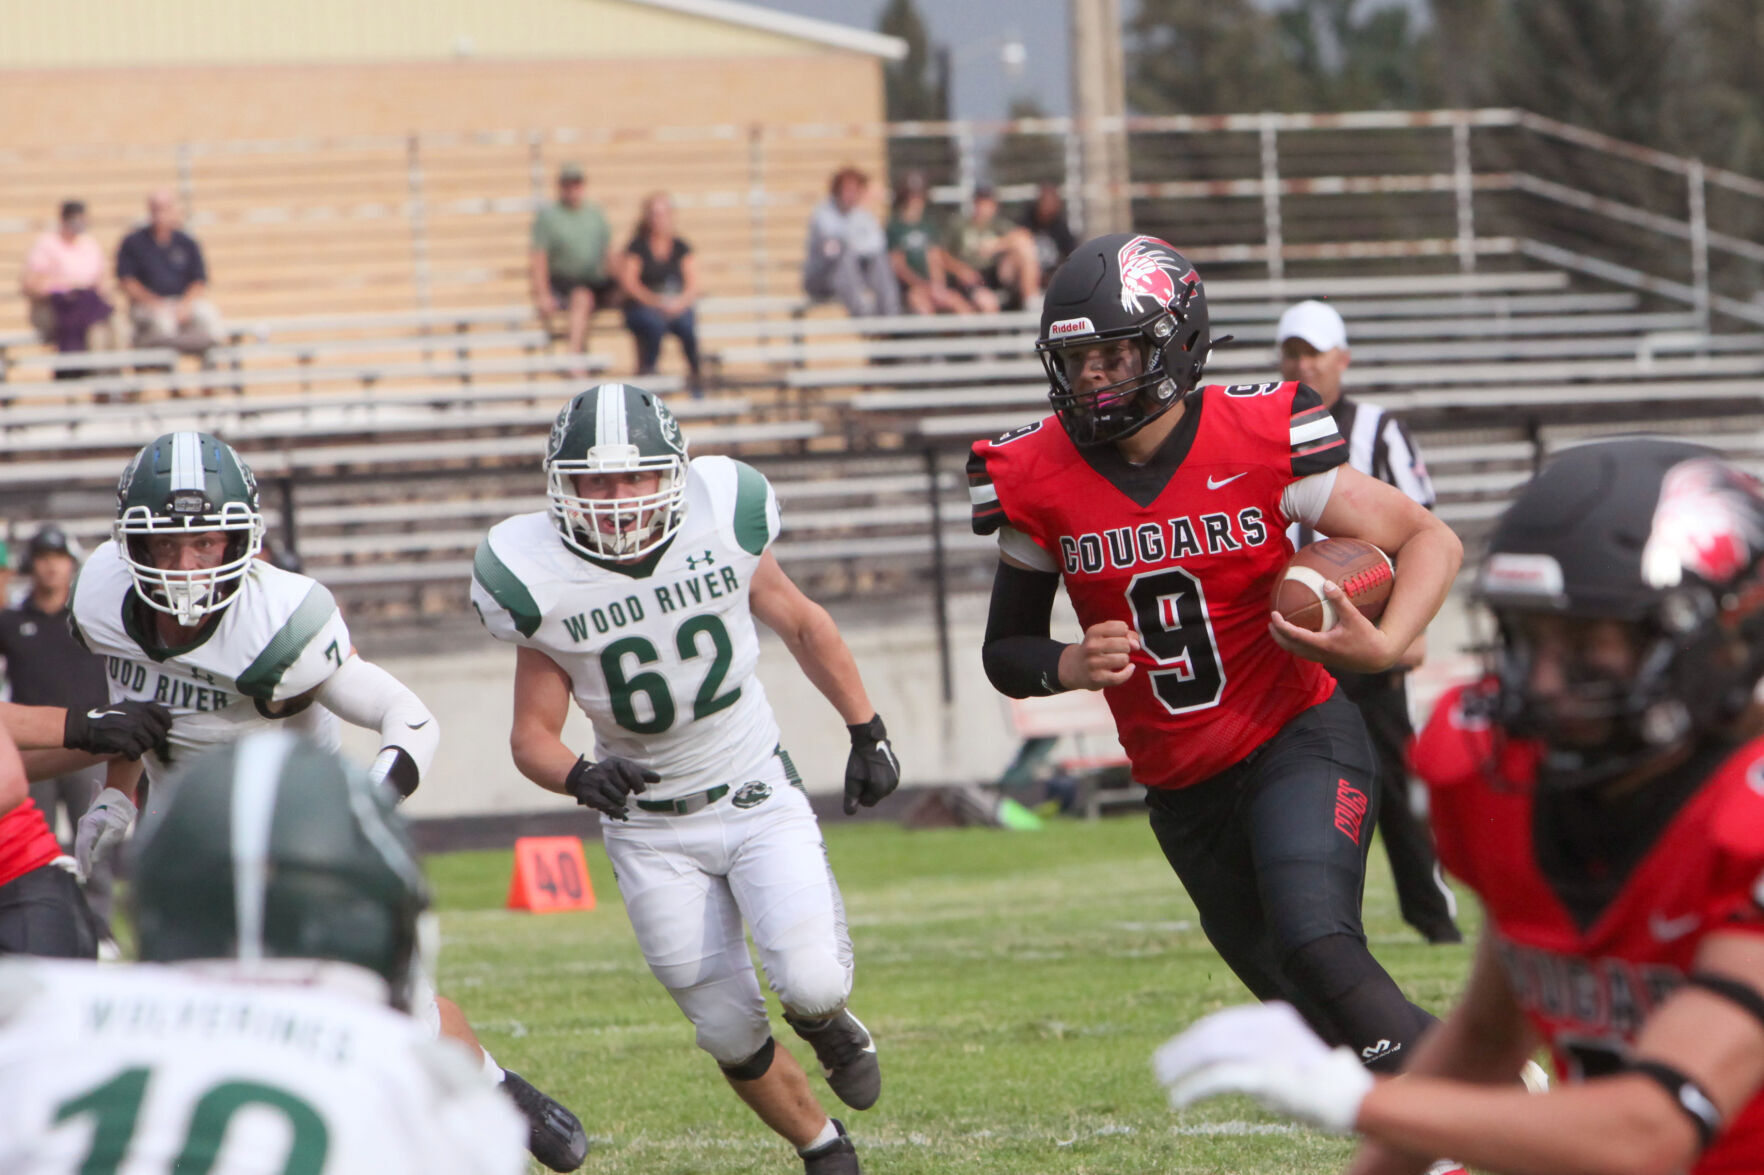 South Fremont opens new era with win over Wood River | Sports